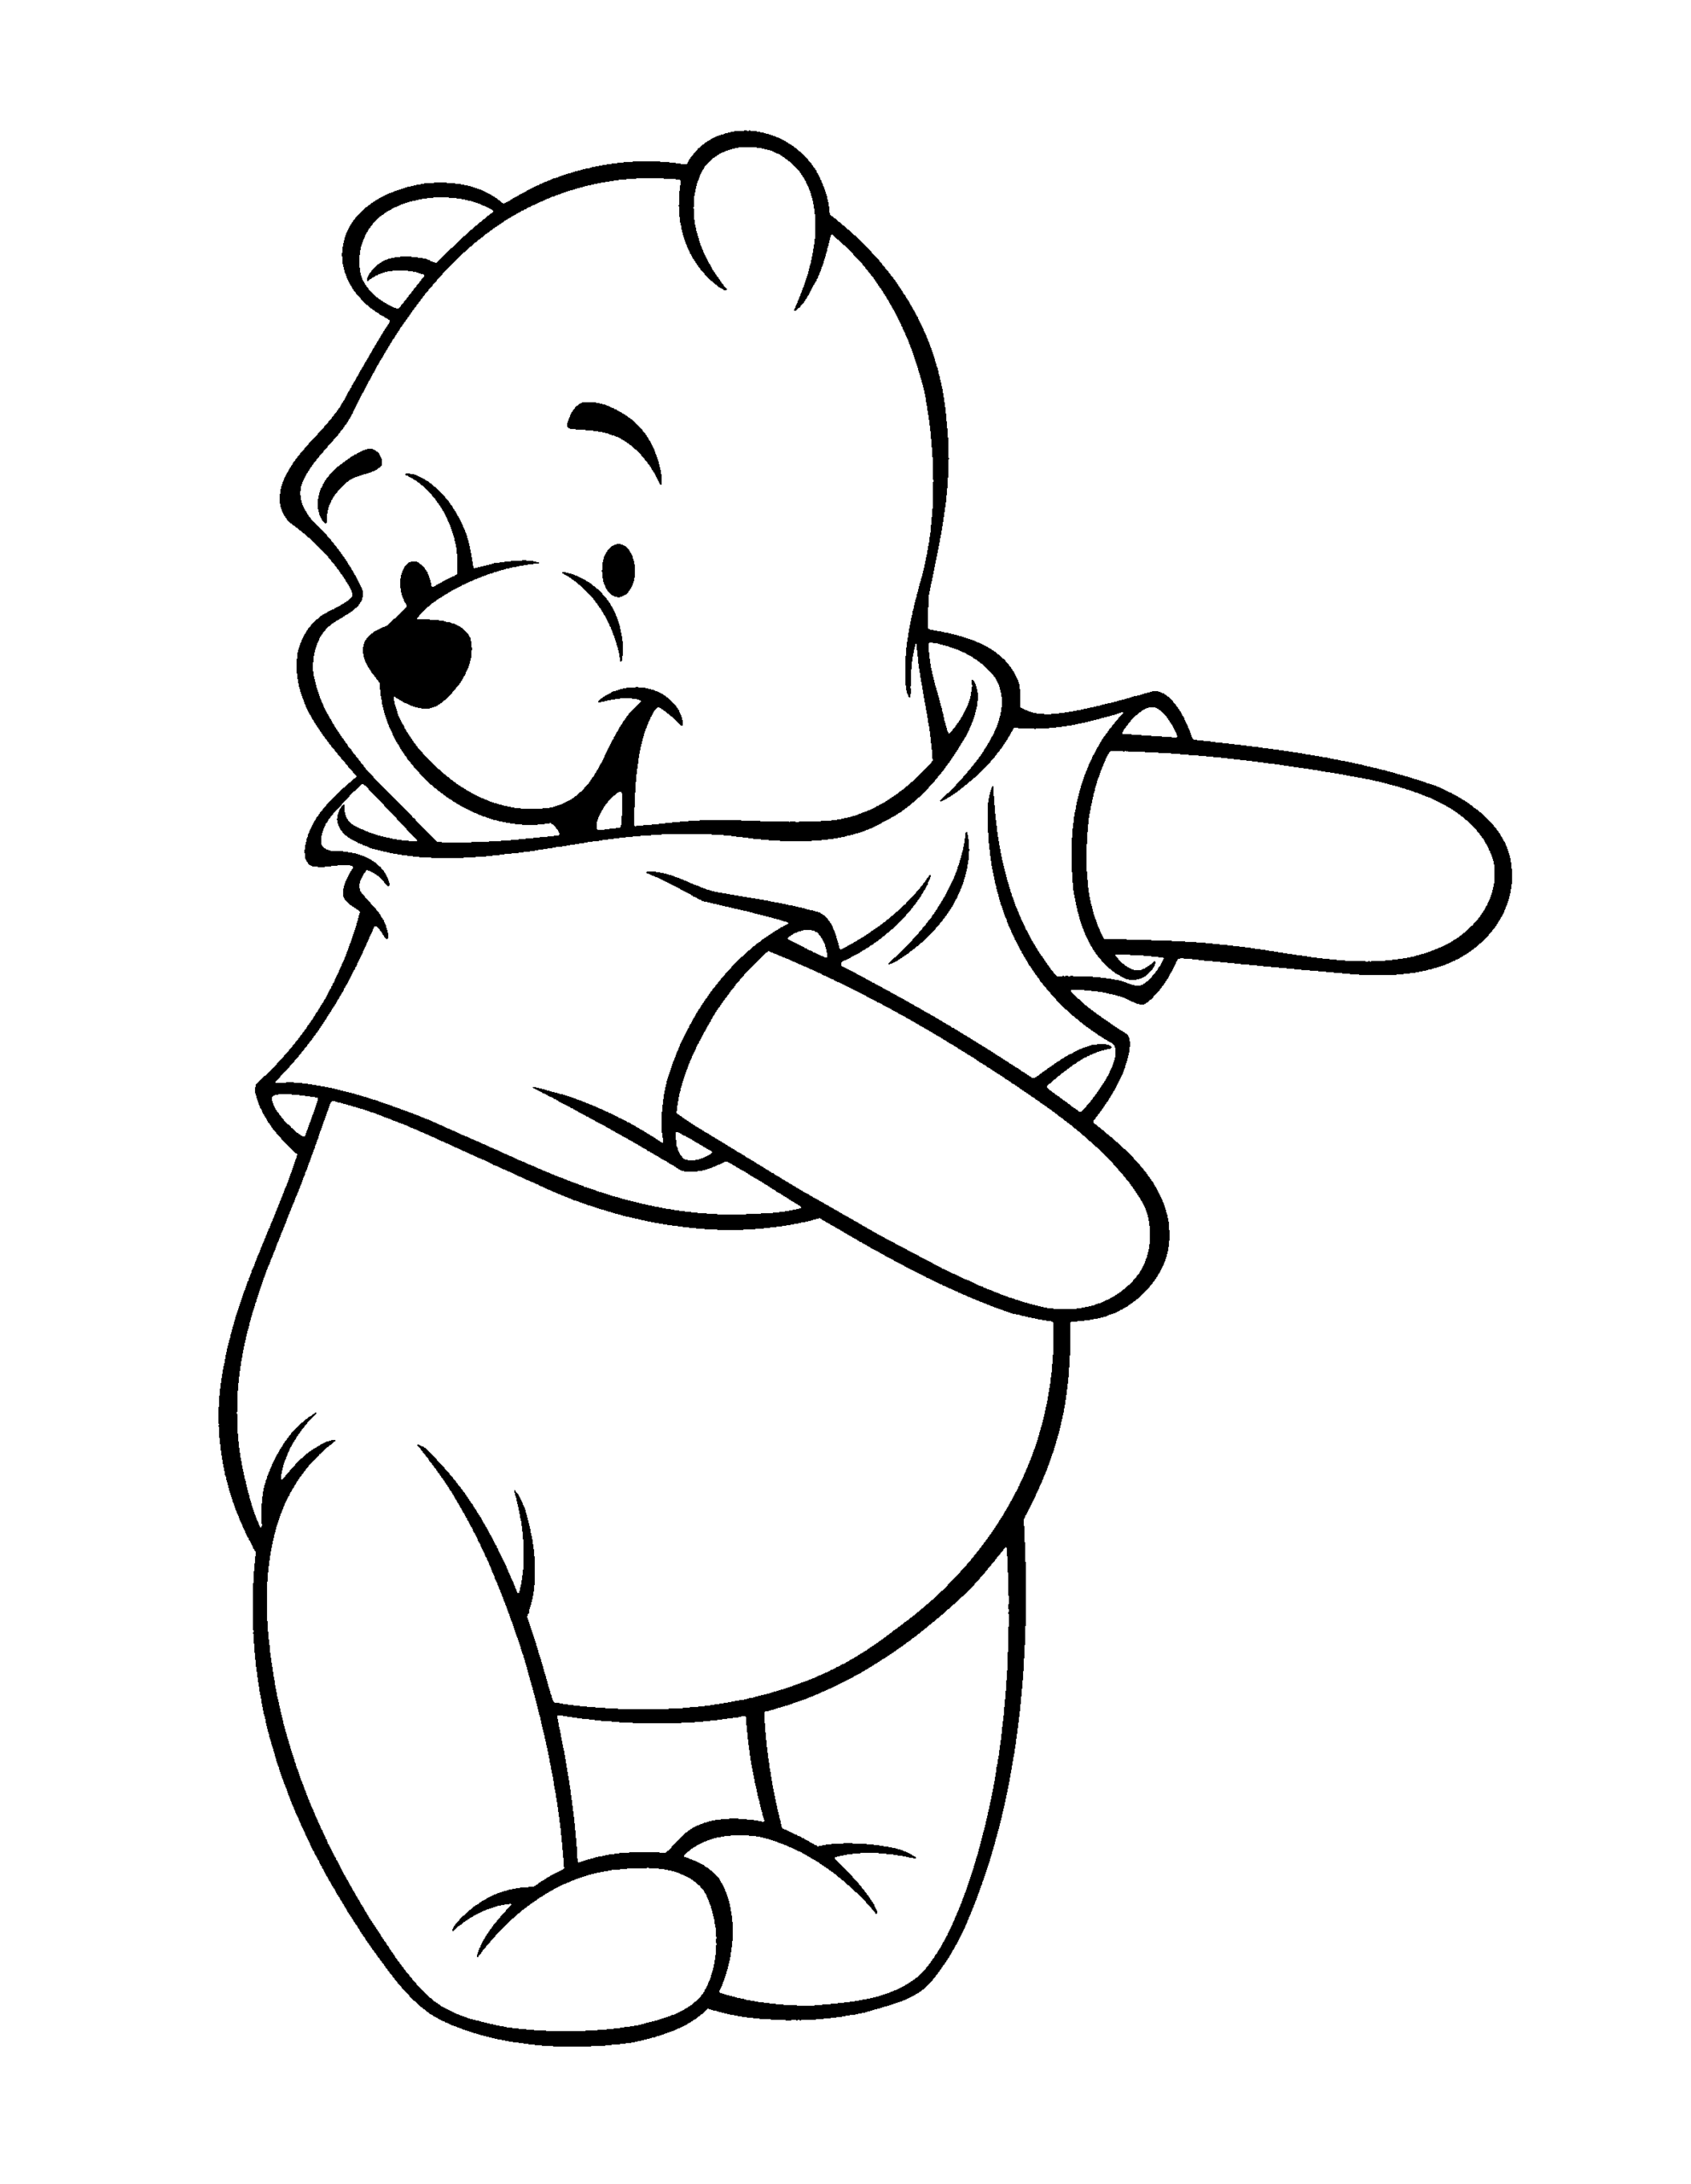 Winnie the Pooh Coloring Pages Cartoons winnie the pooh 73 Printable 2020 7192 Coloring4free